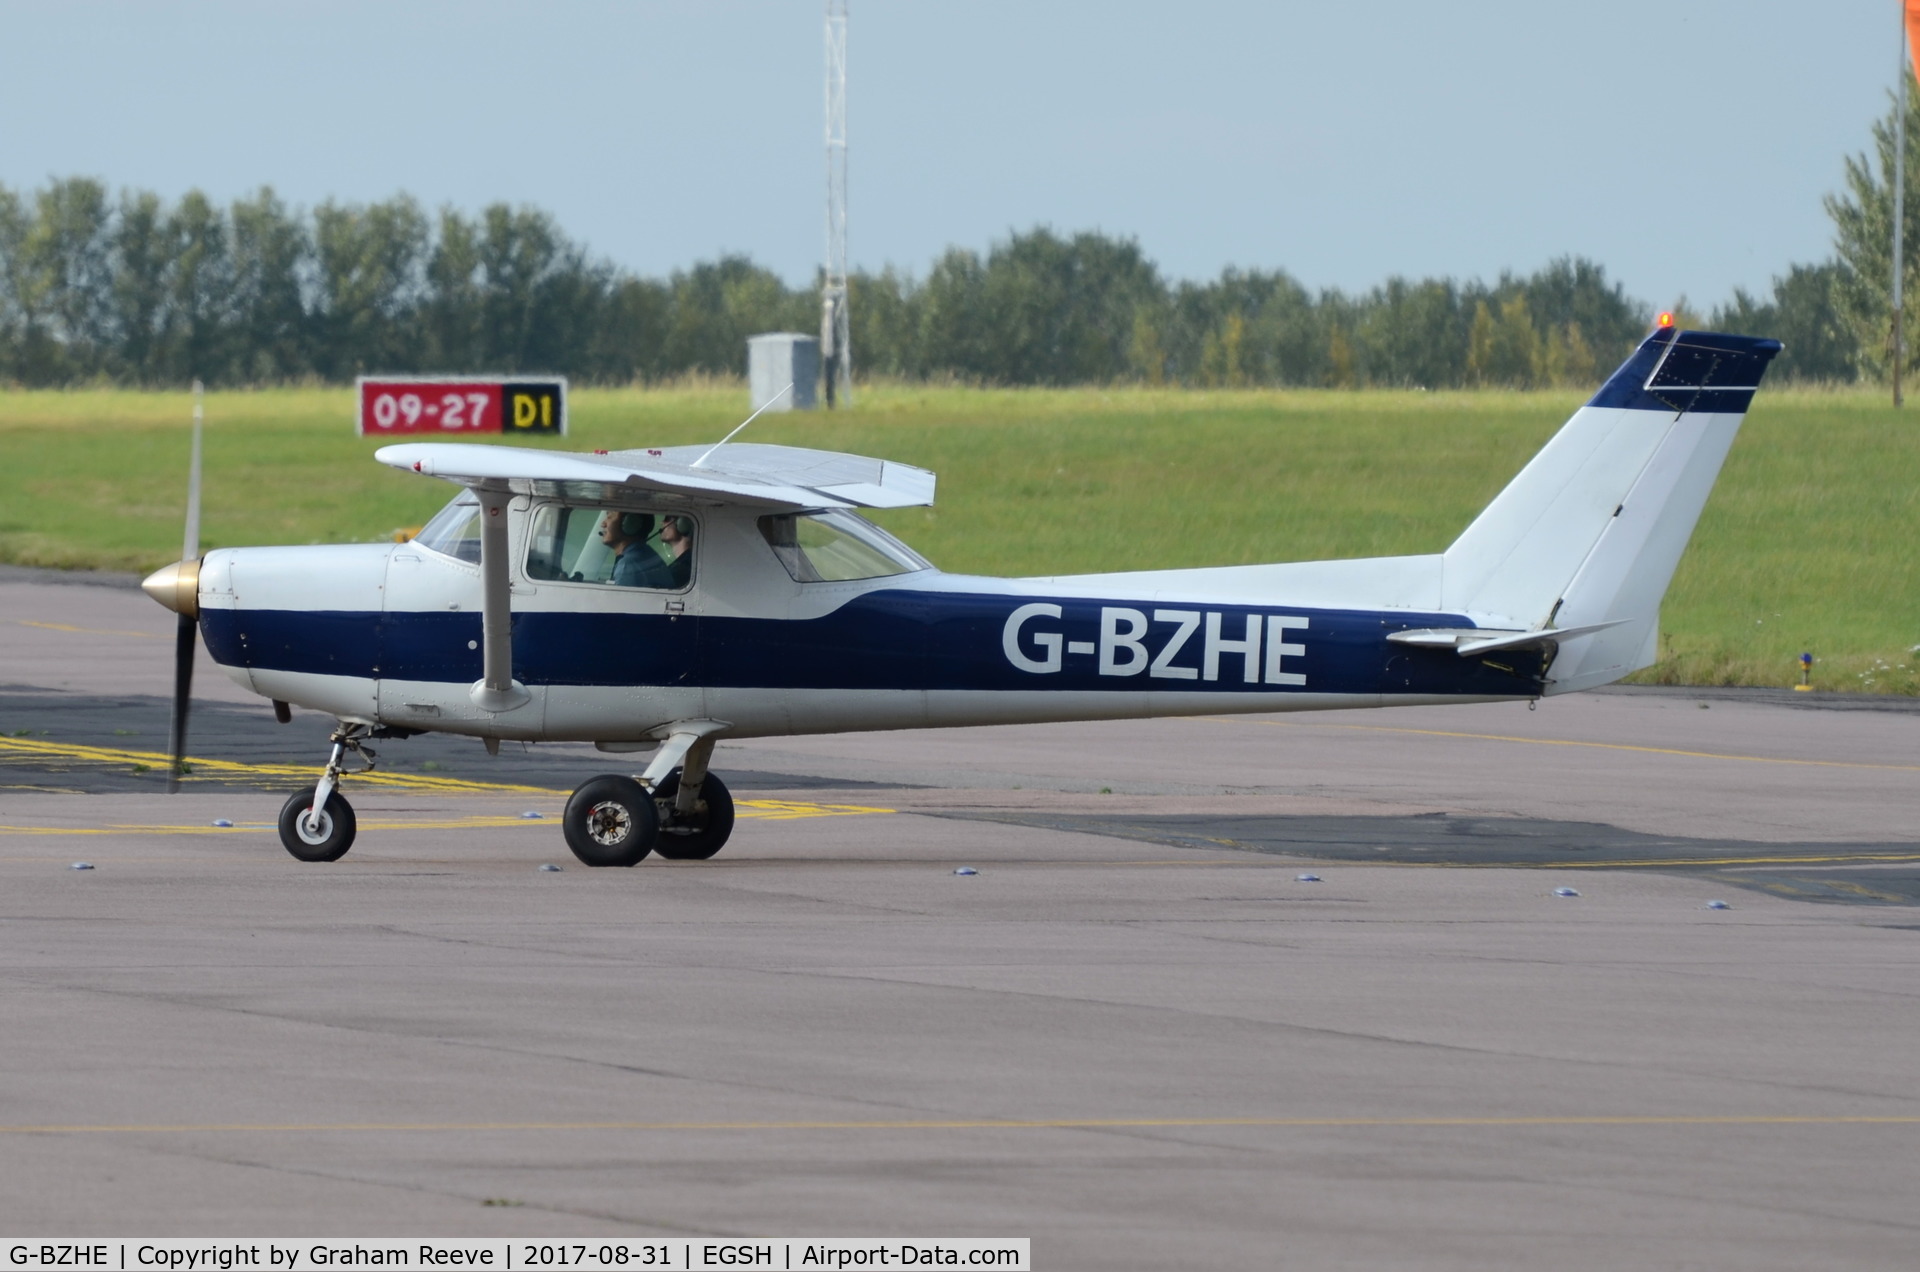 G-BZHE, 1978 Cessna 152 C/N 152-81303, Just landed at Norwich.